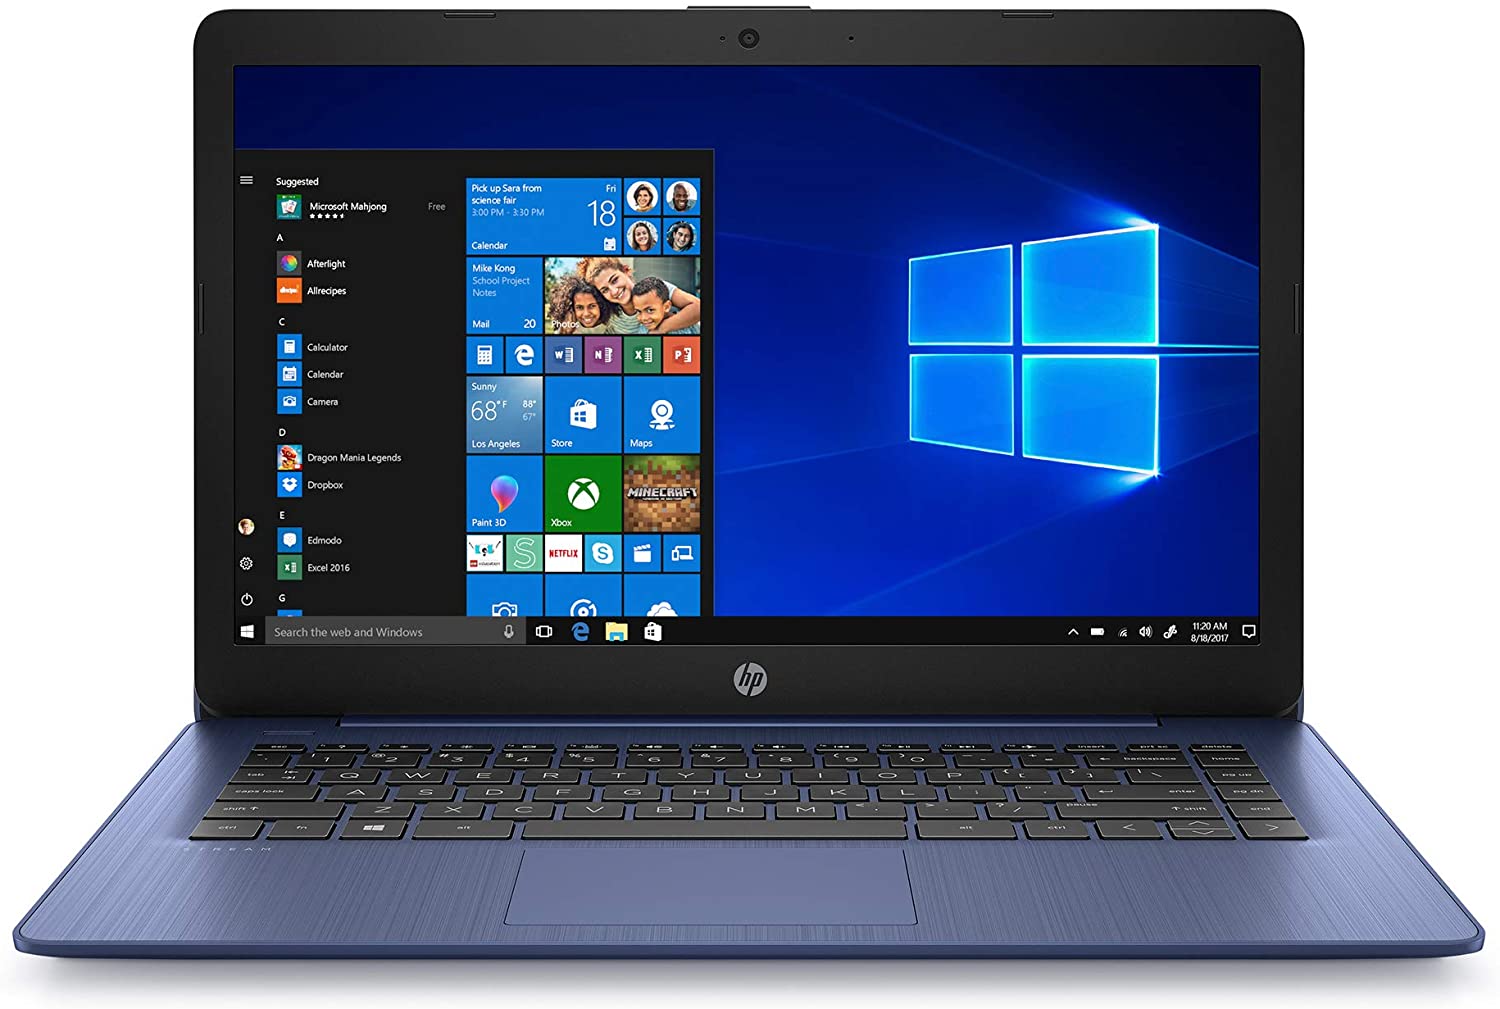 HP Stream 14 inches HD- Best Laptop Under 500 Consumer Reports